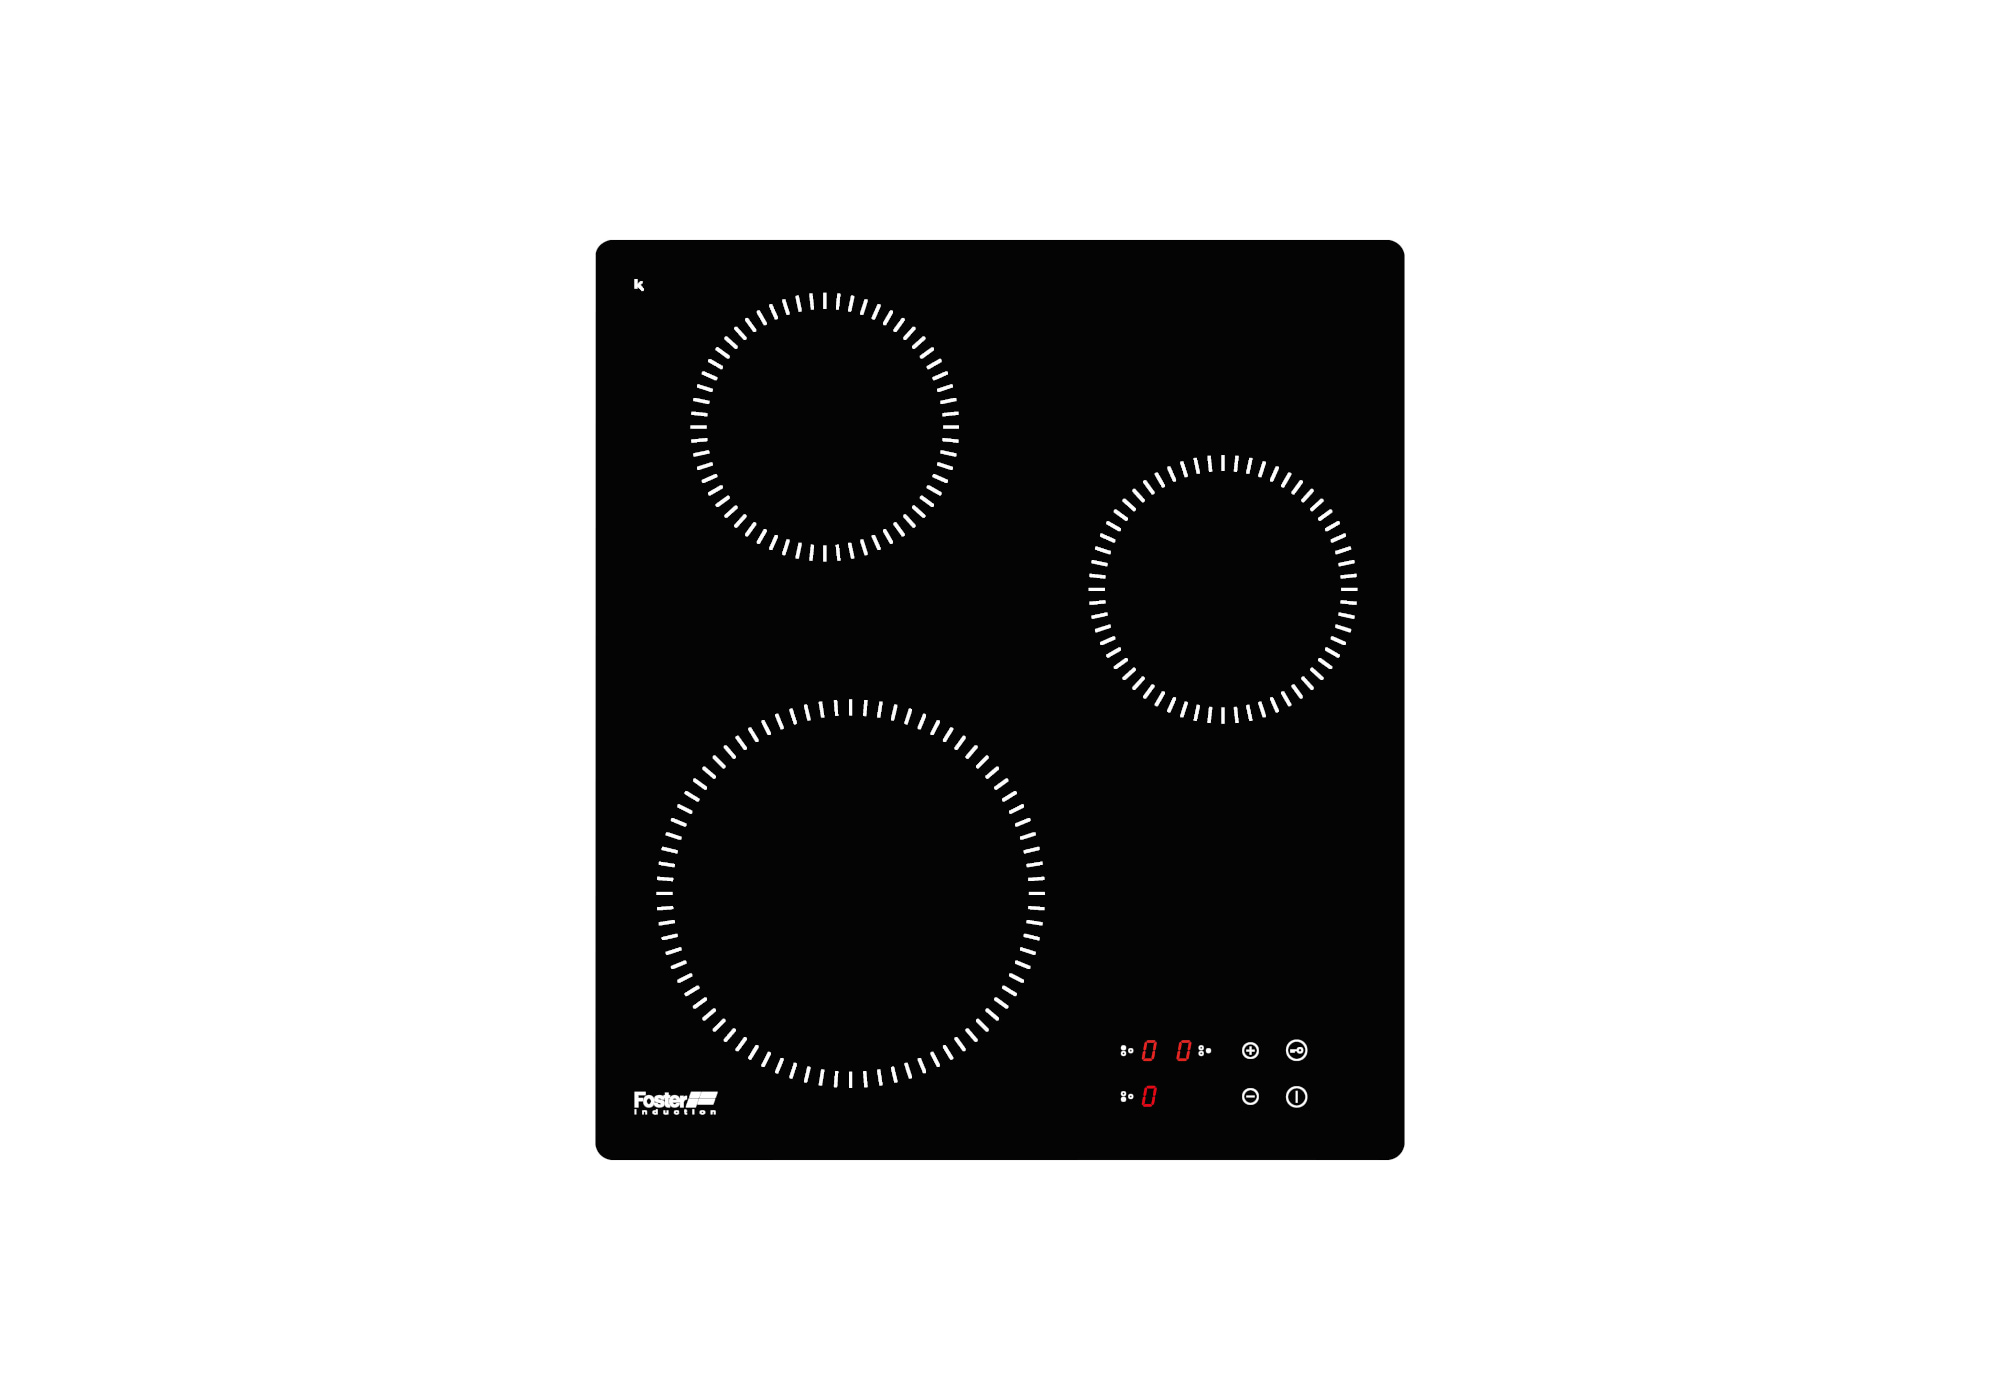 Cooker hob S1000 Induction